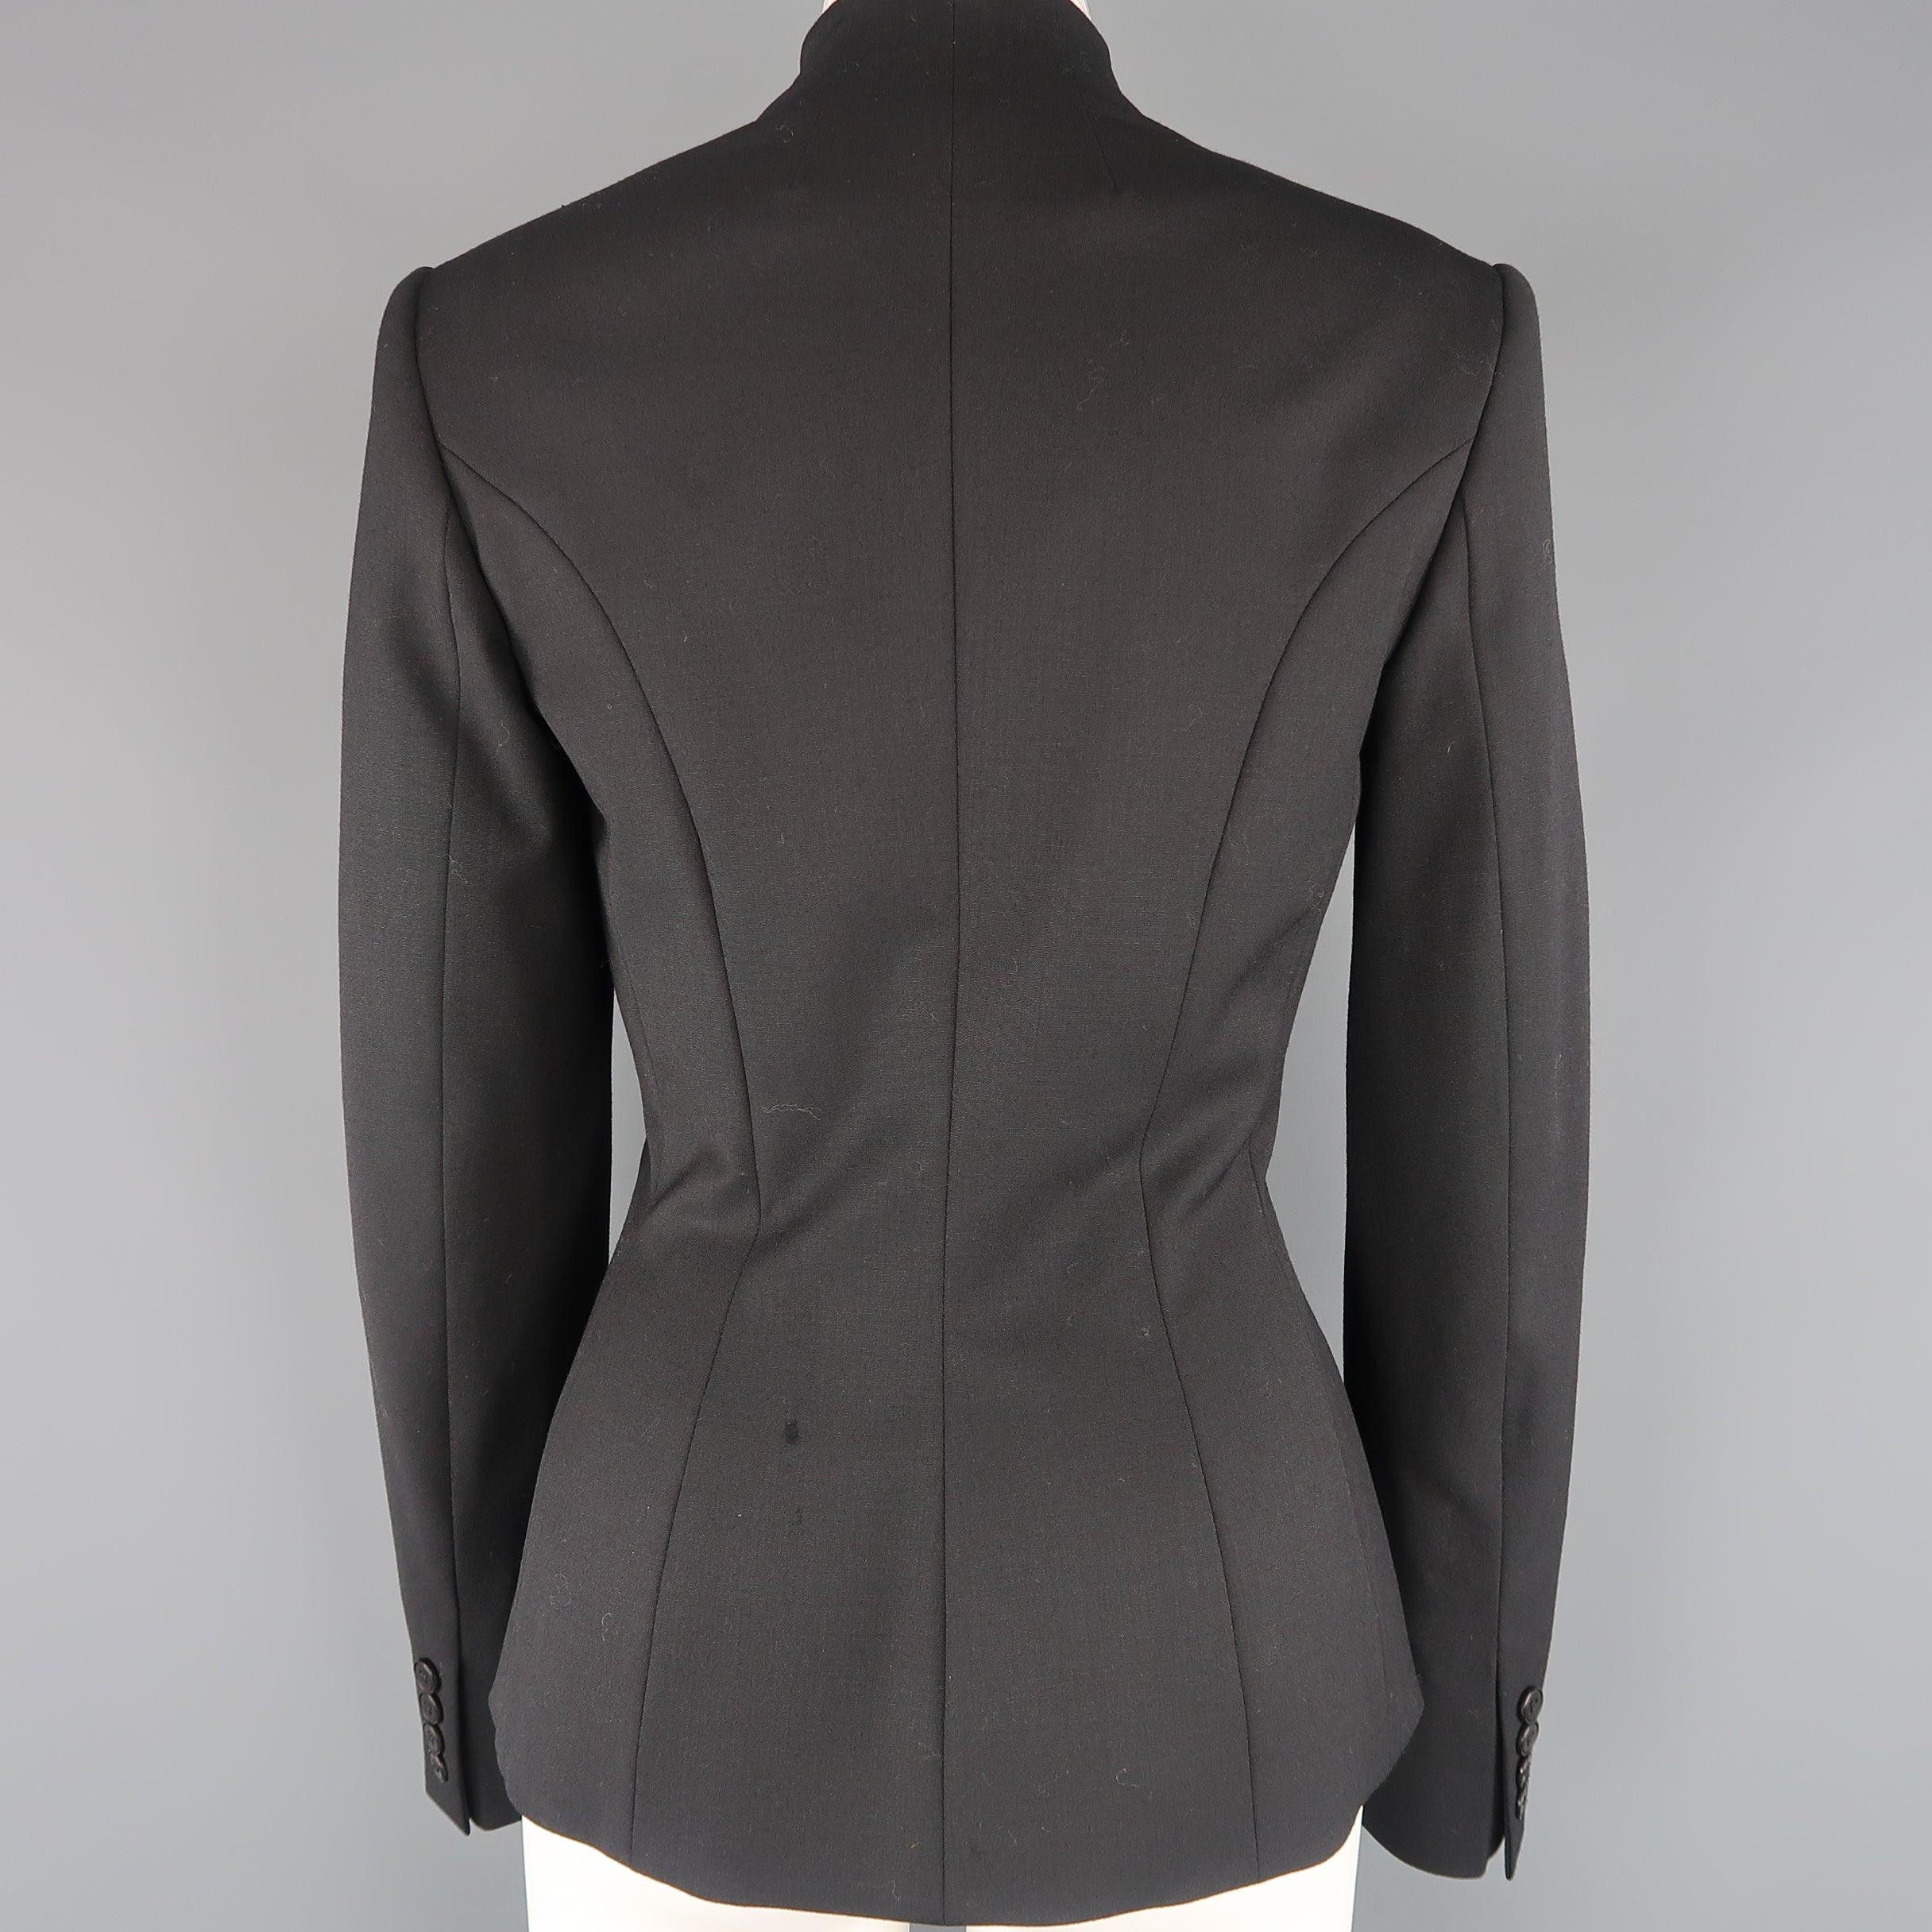 RALPH LAUREN Size 6 Black Wool Stand Up Collar Jacket For Sale 1